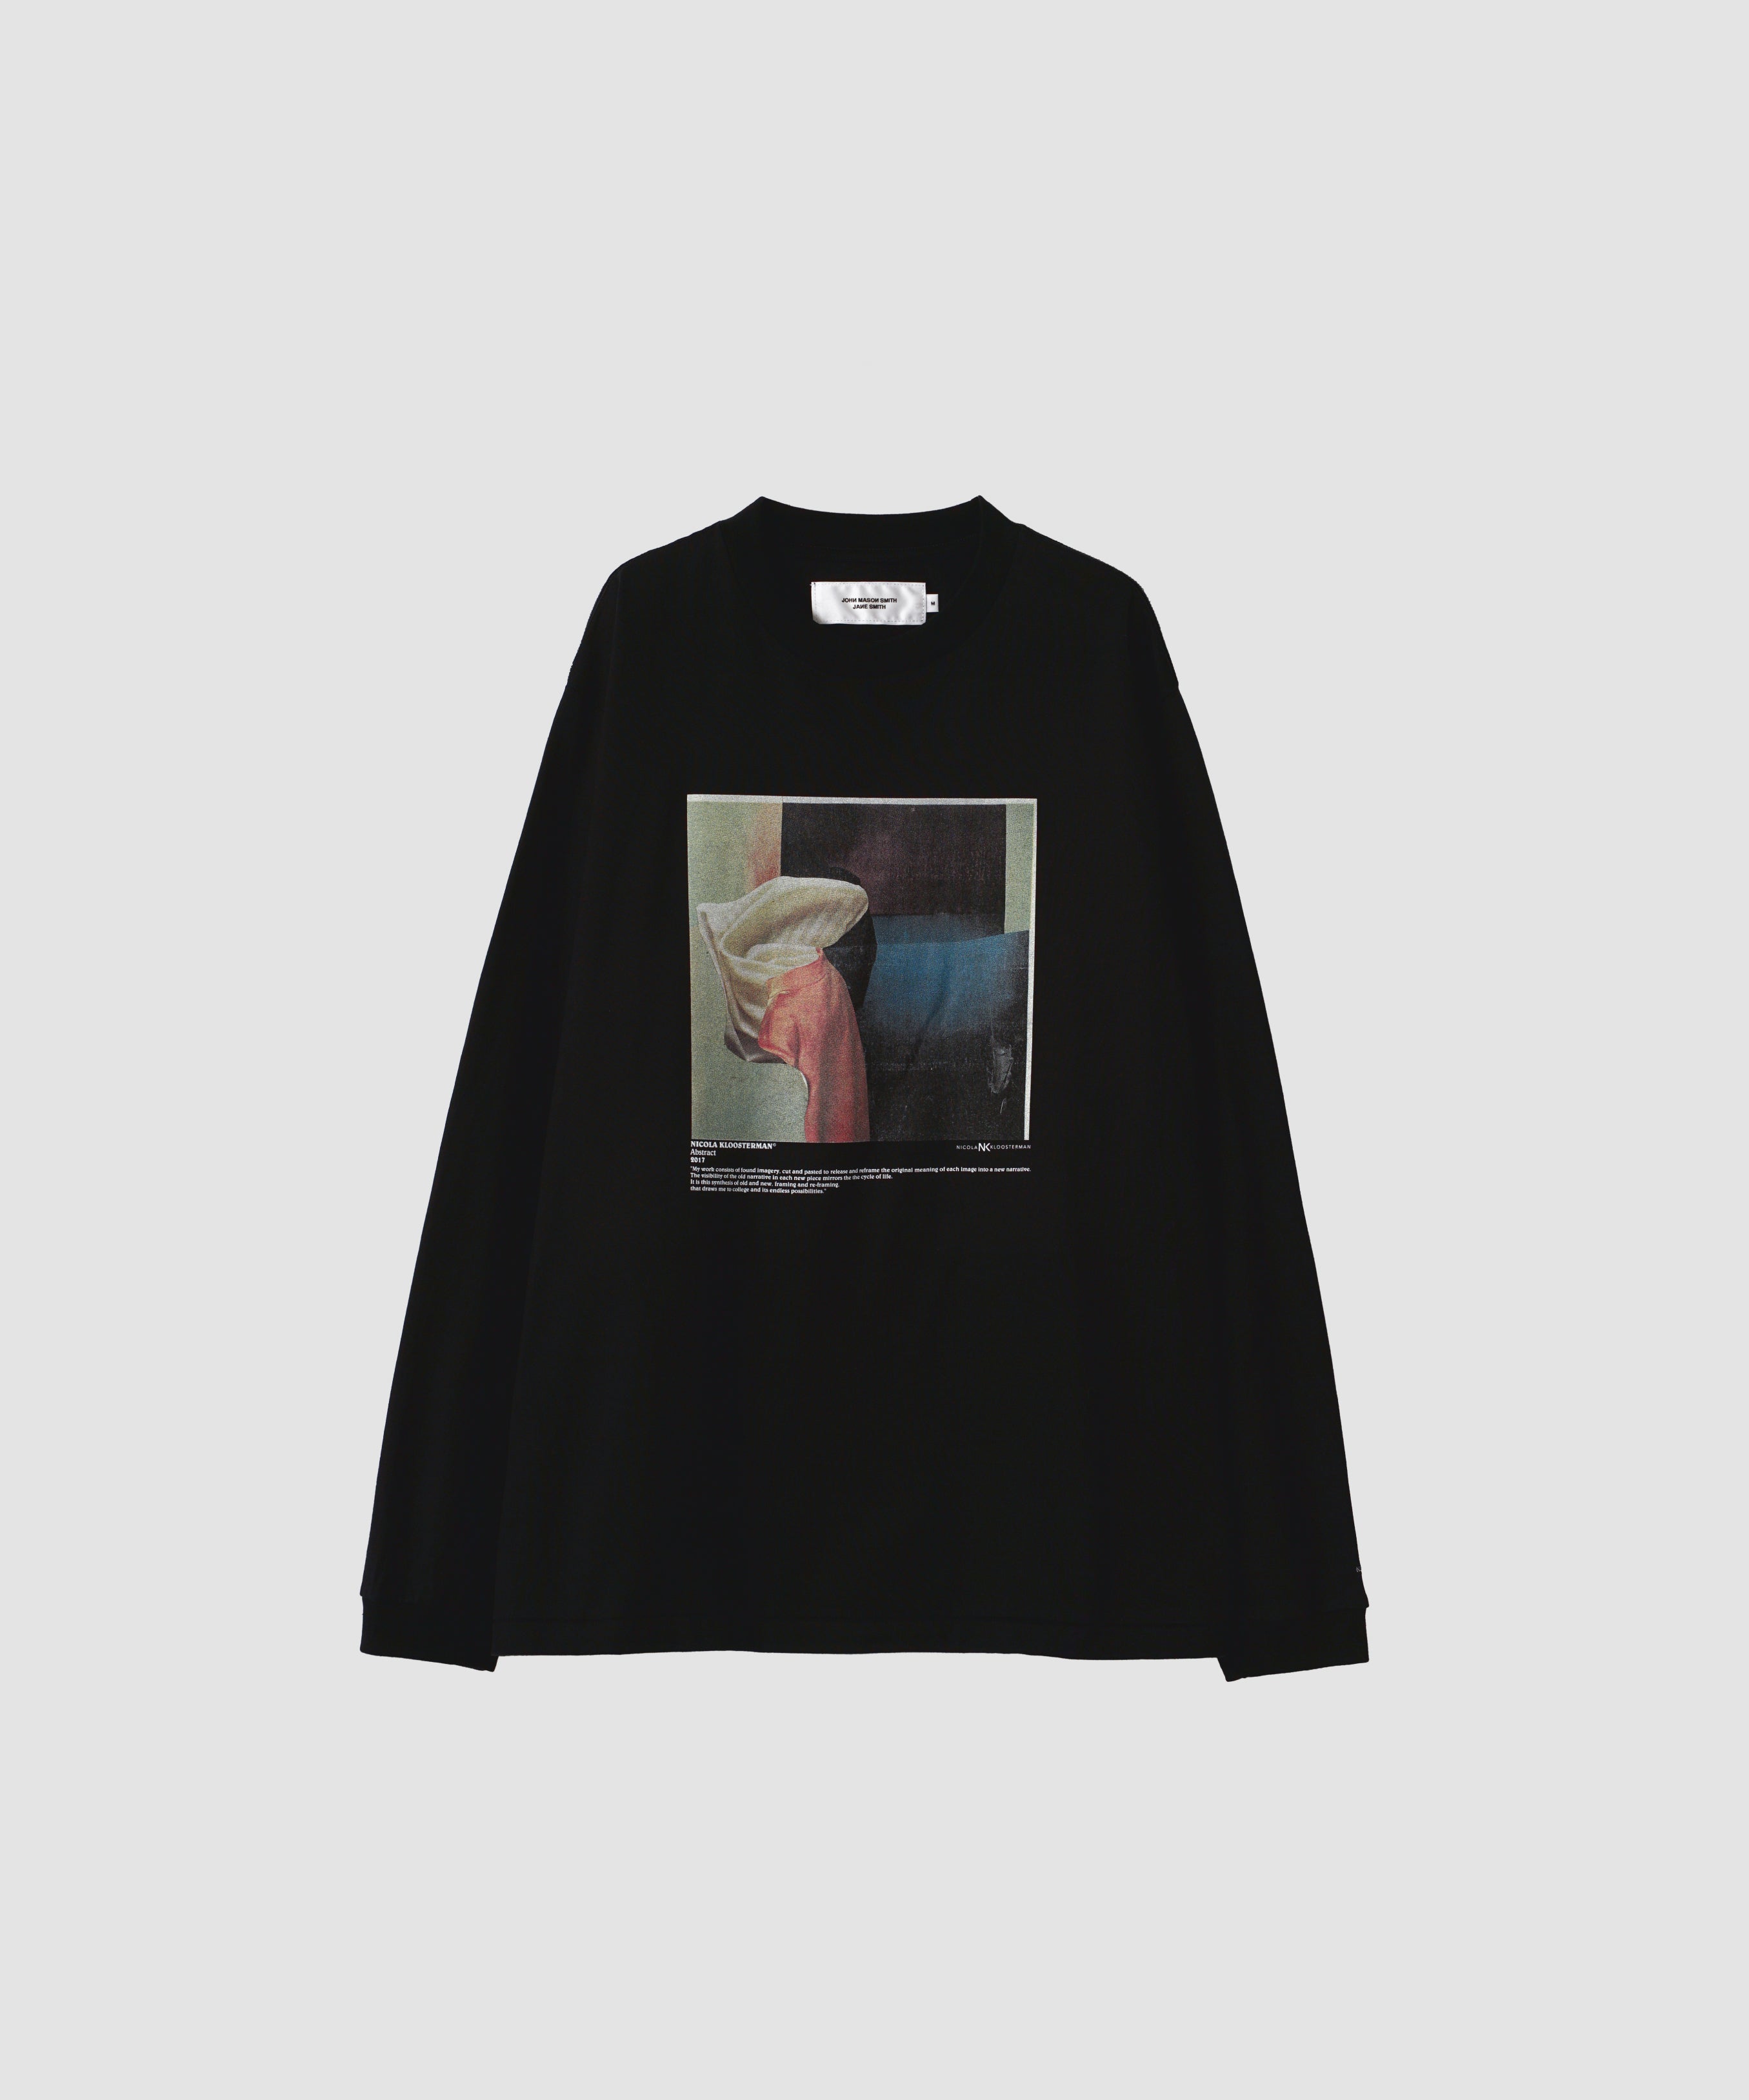 NICOLA KLOOSTERMAN ABSTRACT L/S T-SHIRT